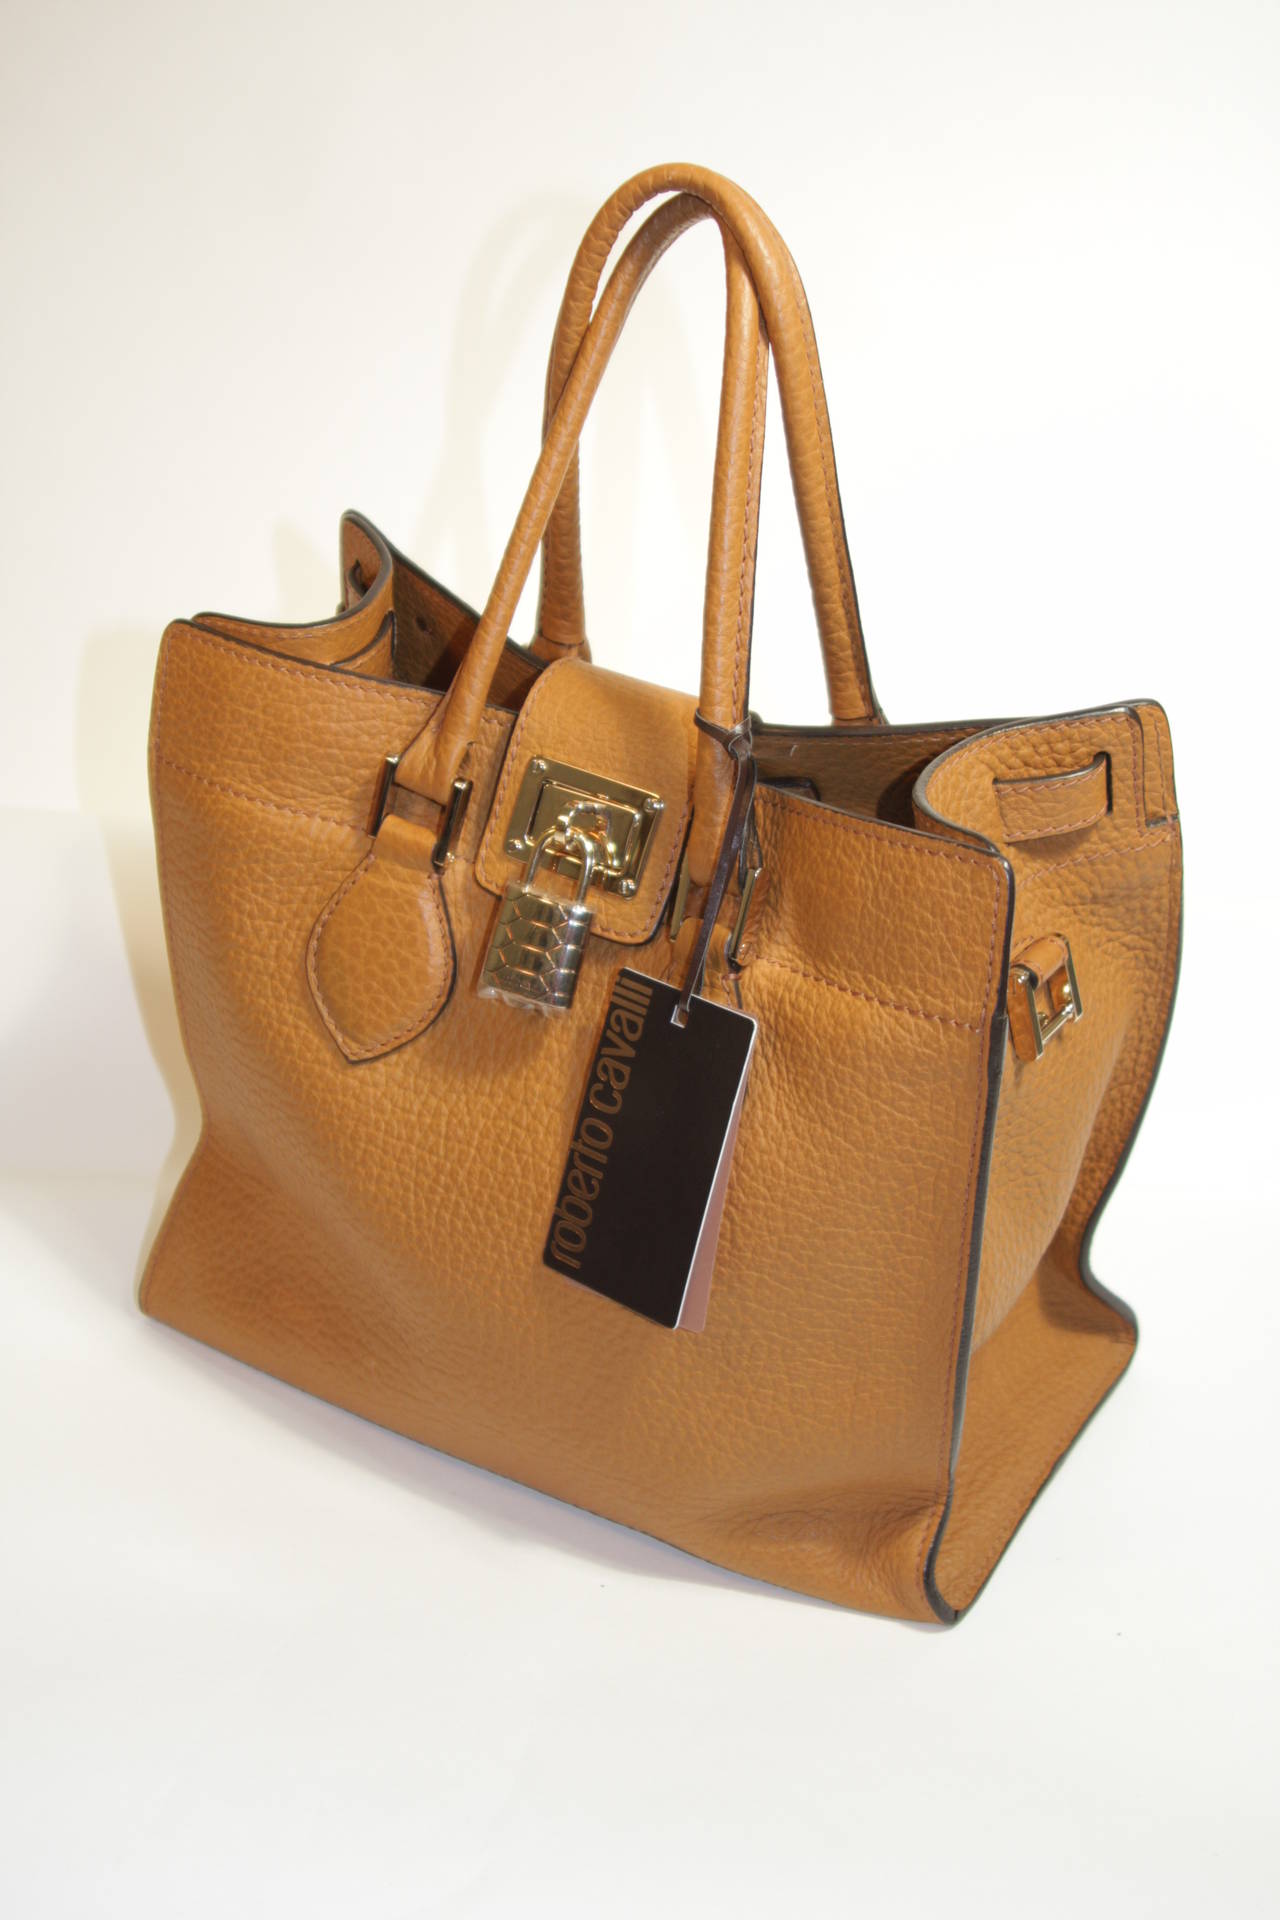 This Roberto Cavalli purse is composed of the finest leather in a wonderful tan hue. There are double double strap handles and a zipper closure. The purse is in excellent condition, possibly unused. Comes with dust bag. Missing strap. The interior